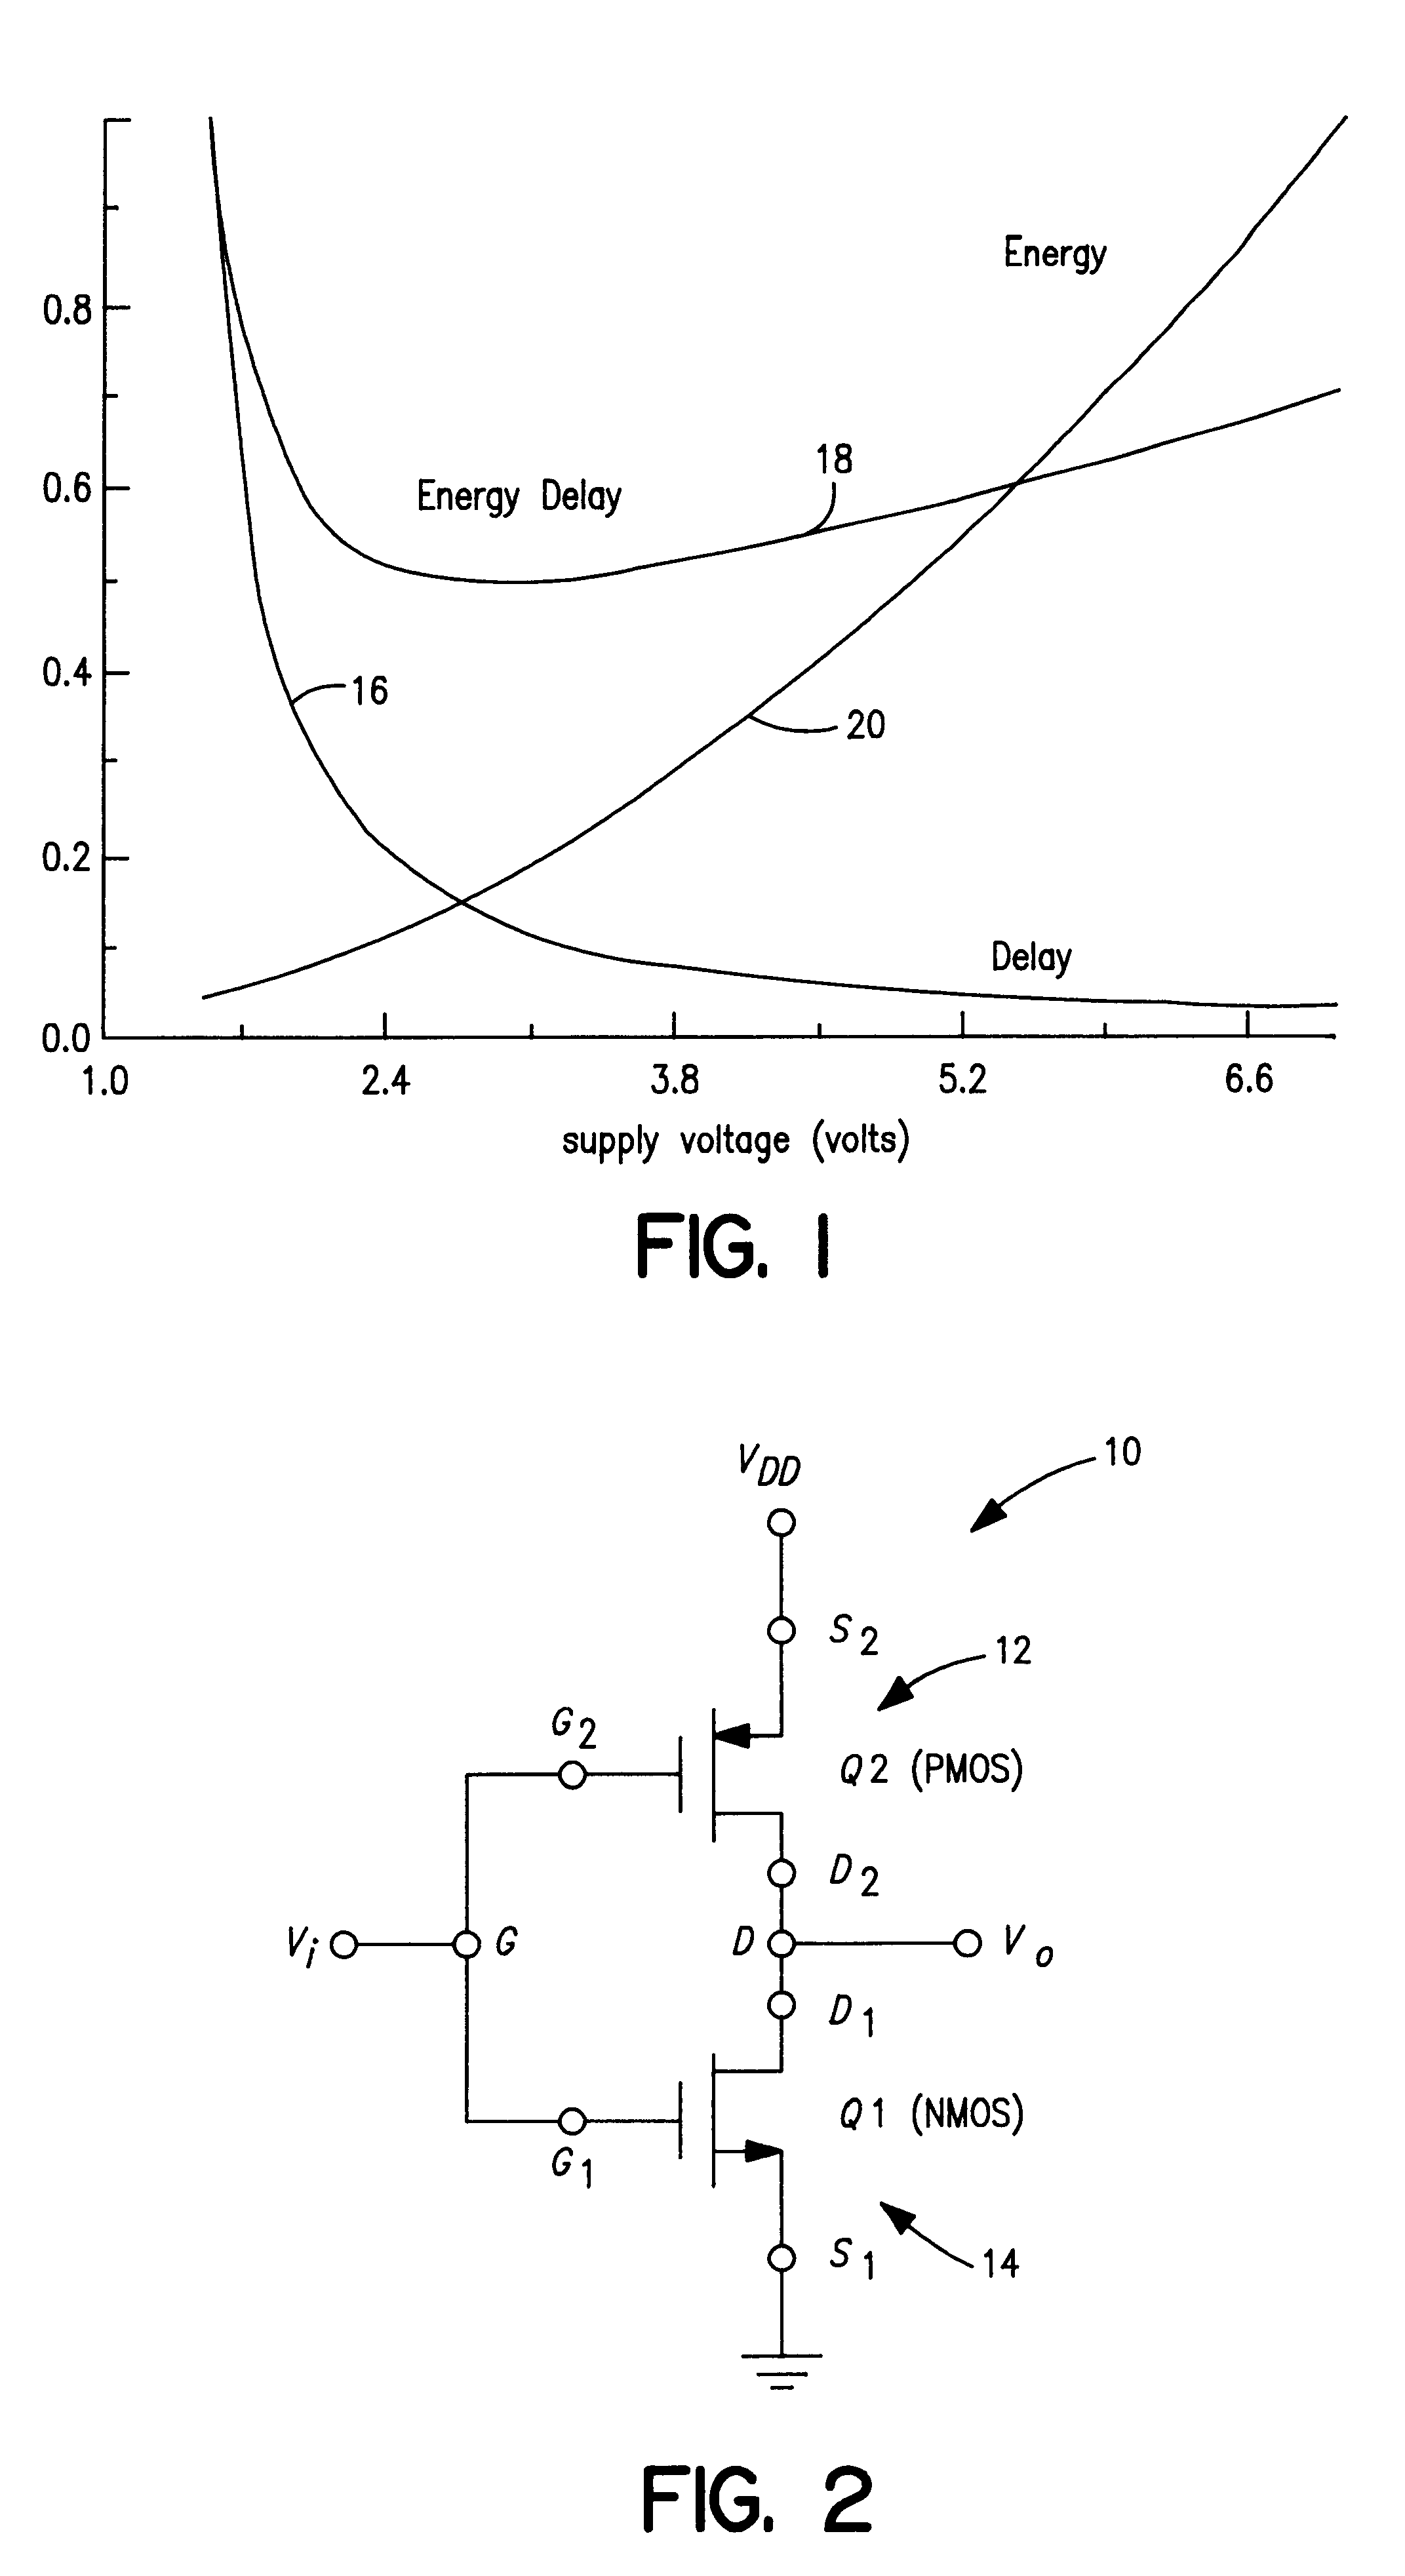 Power consumption reduction in medical devices employing just-in-time voltage control